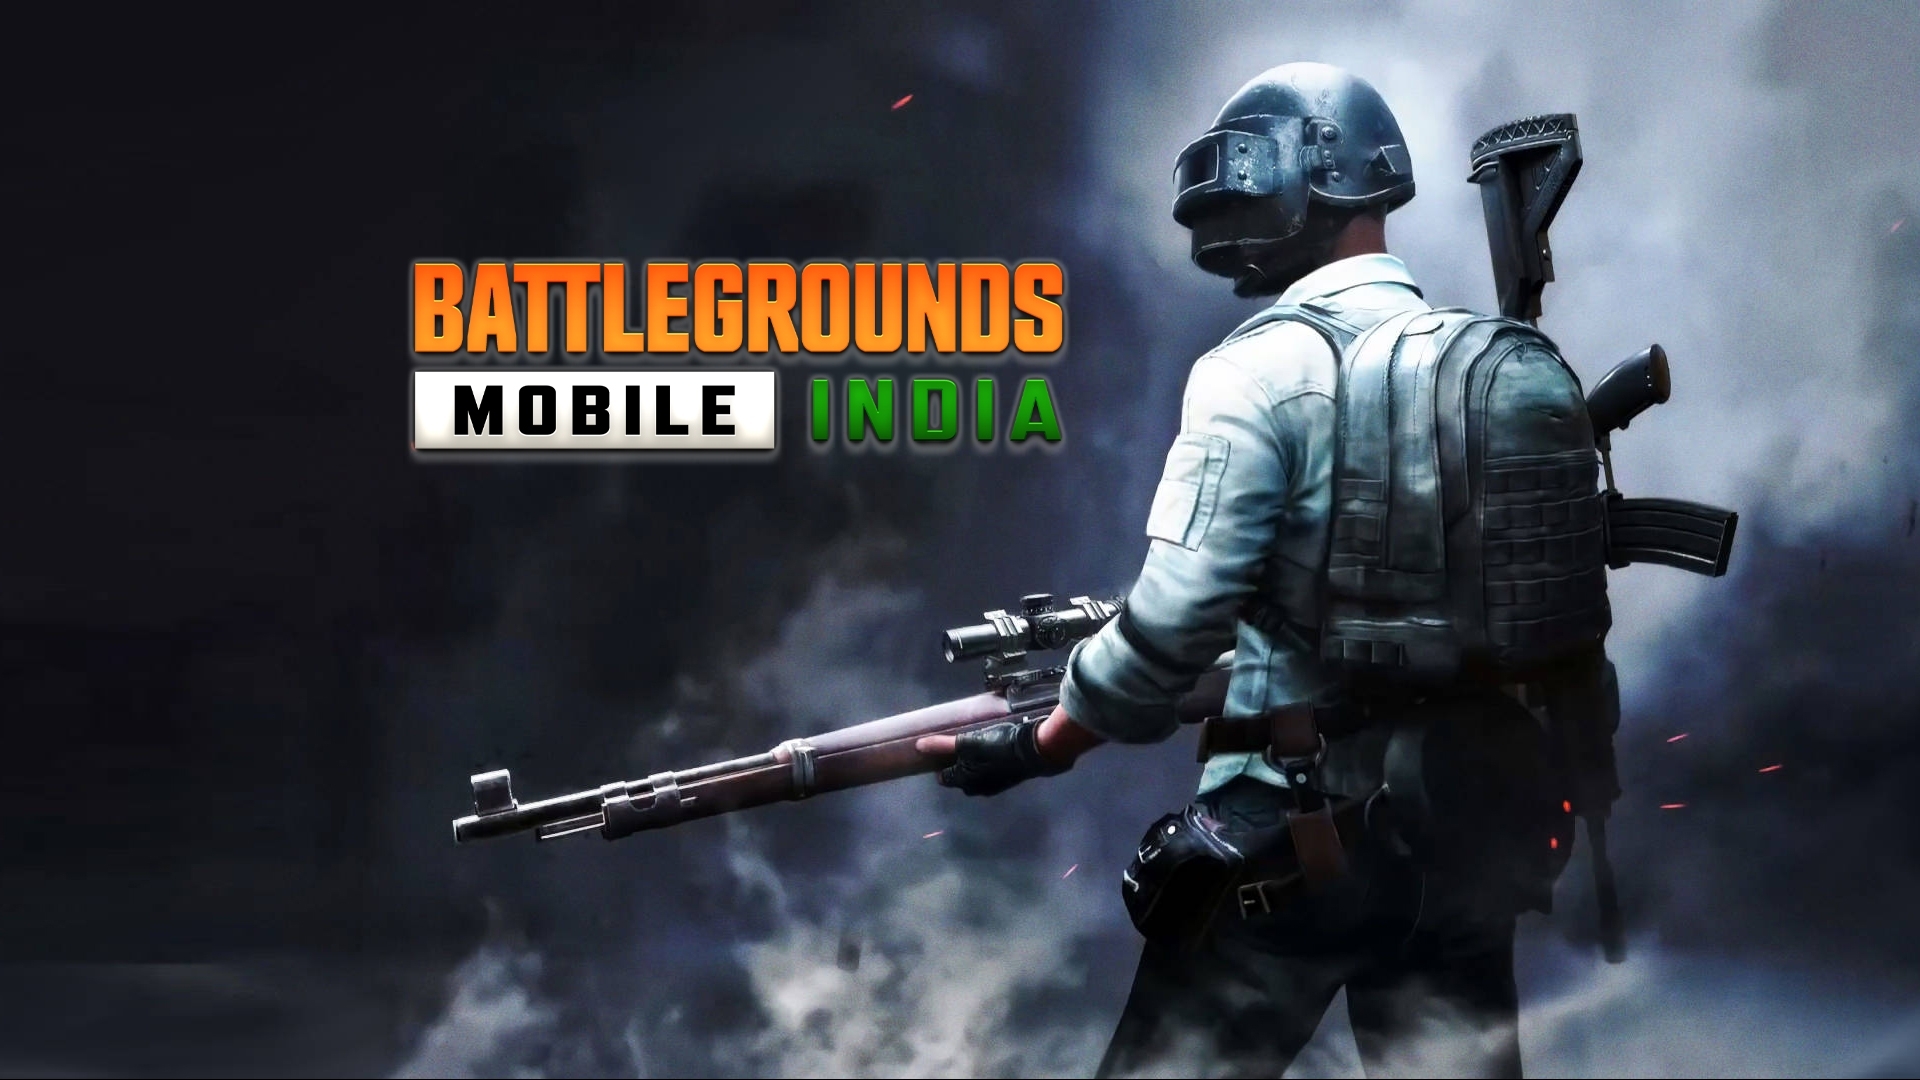 What is Battlegrounds Mobile India - New Name of PUBG Mobile